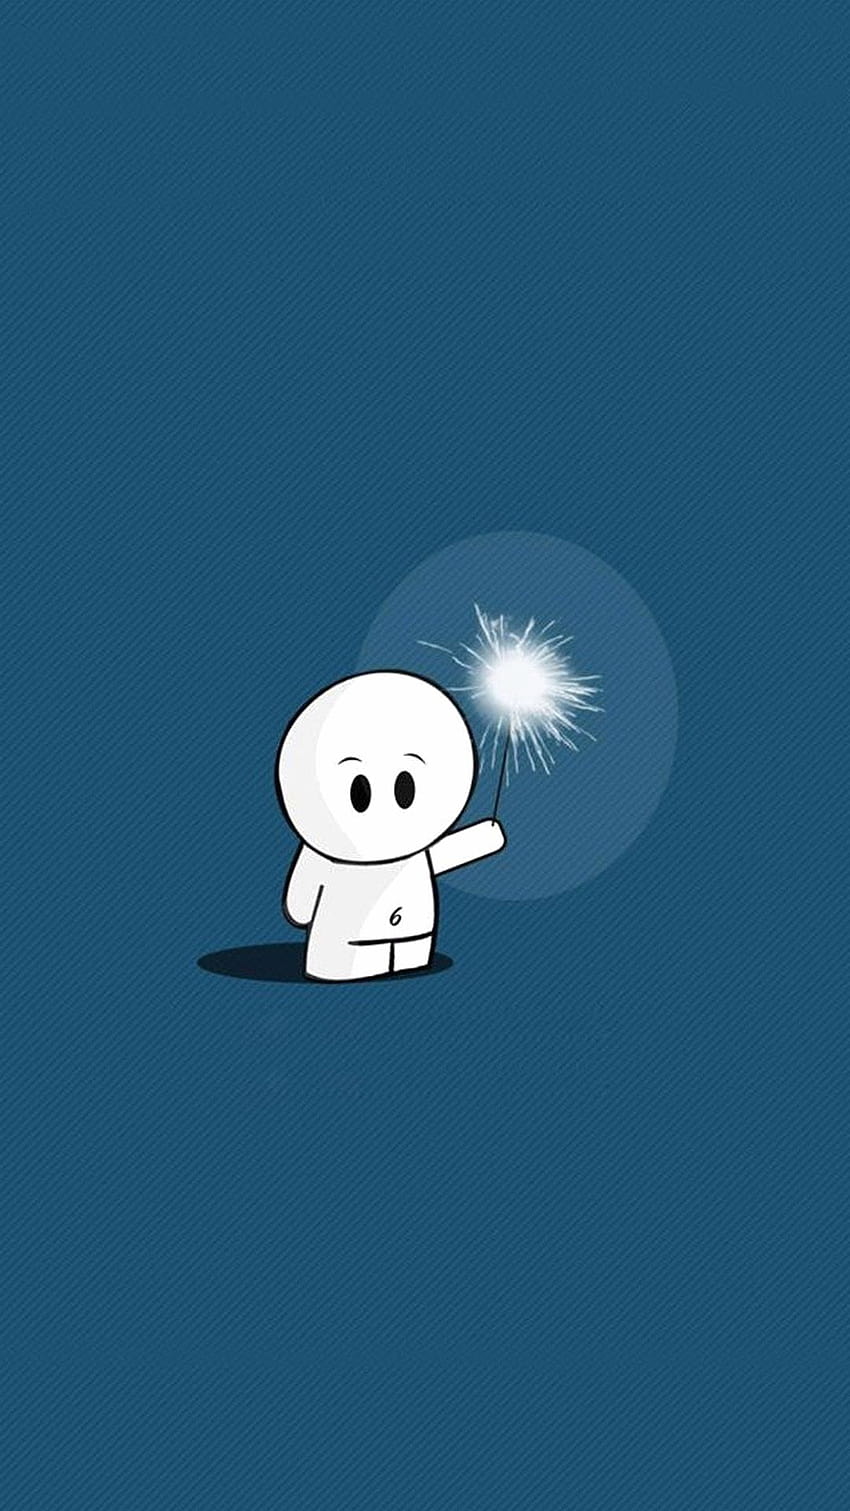 IPhone wallpaper with a white stick figure holding a sparkler on a blue background - Happy